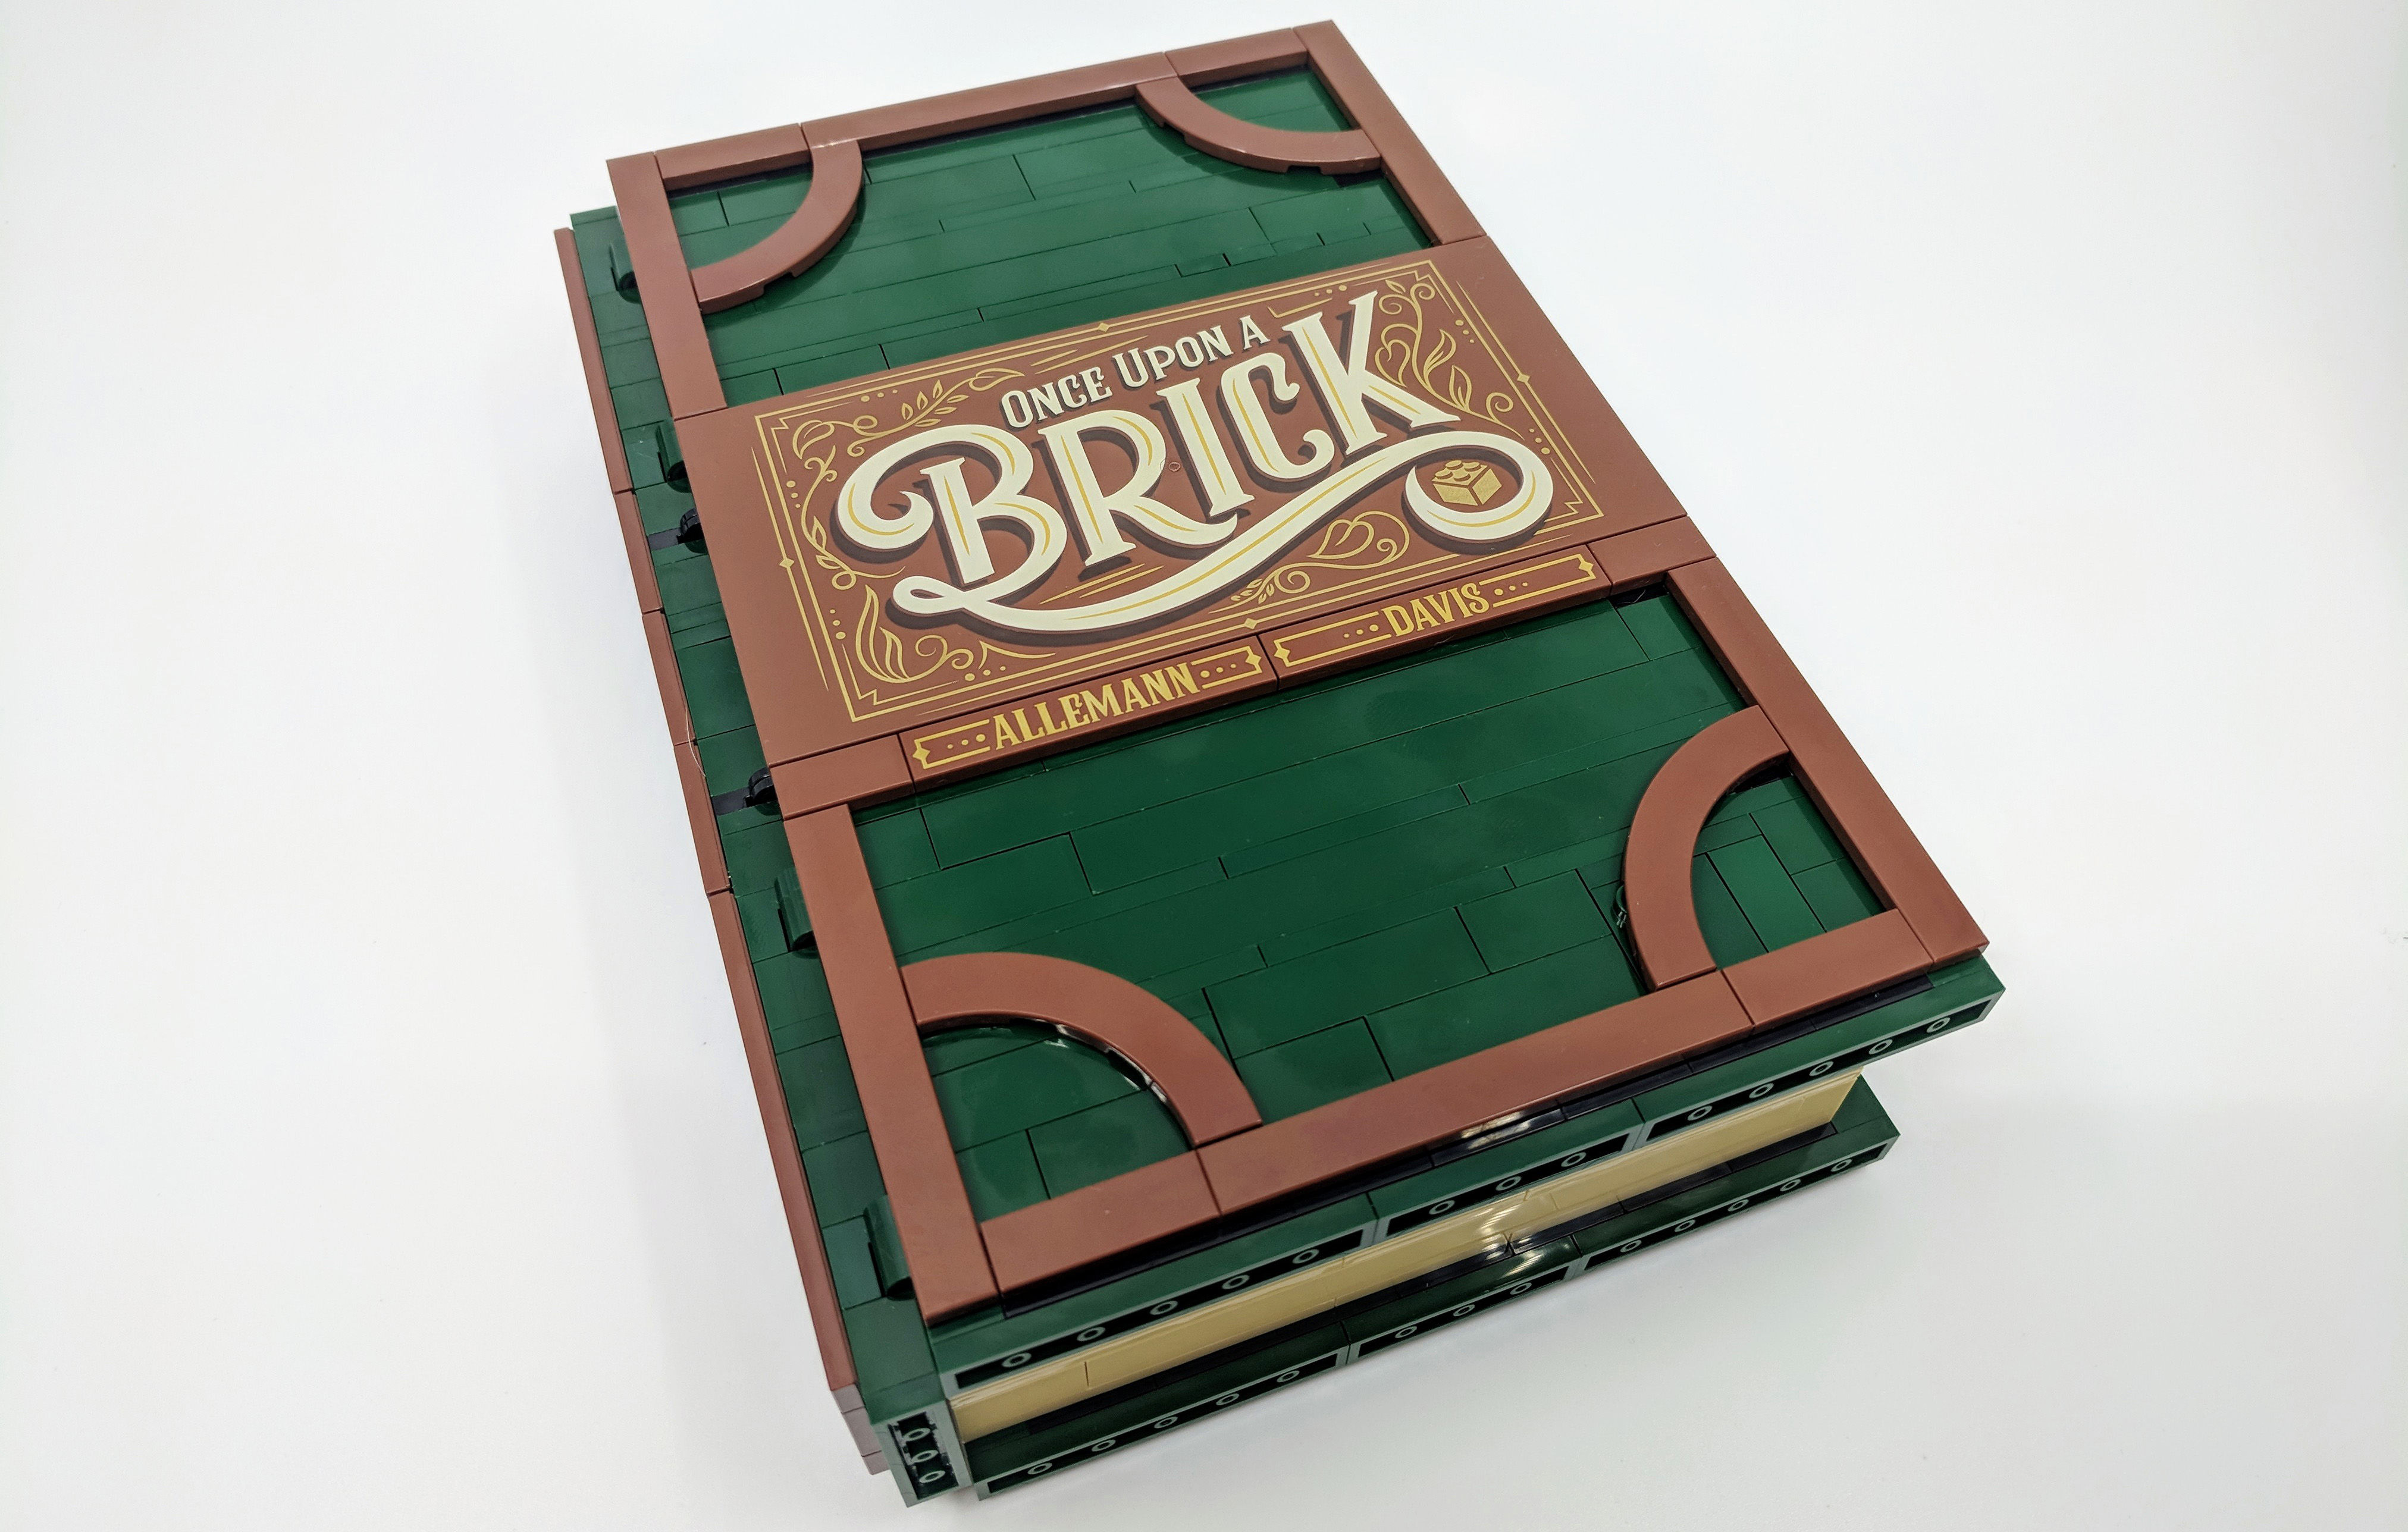 LEGO Ideas set revealed as Once Upon a Brick 21315 Pop-Up Book [News] -  The Brothers Brick